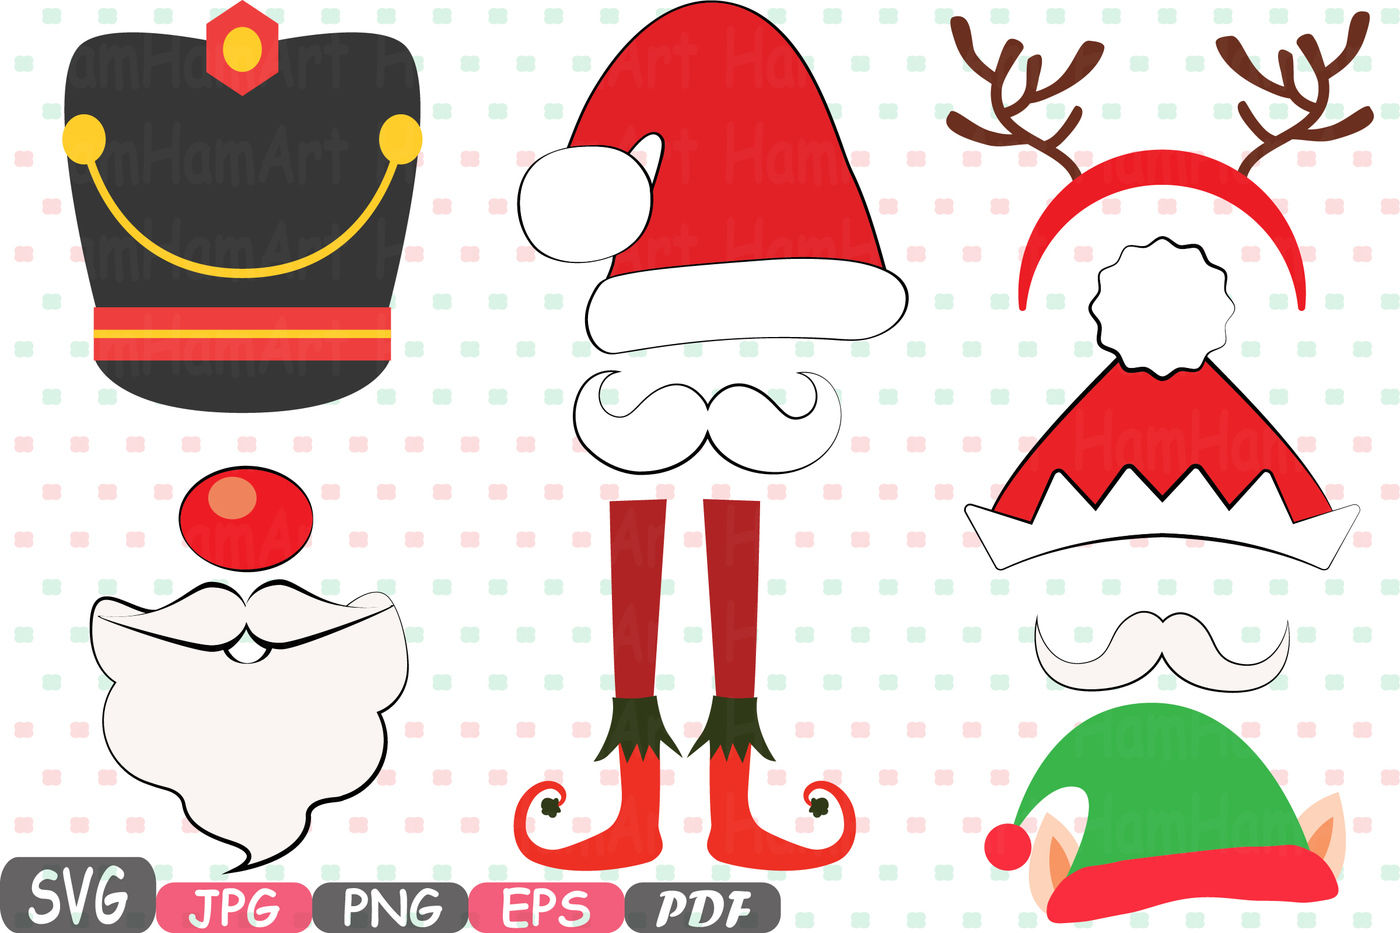 Time of the Year Silhouette Santa Clause Tree Farm Cricut SVG Christmas SVG AI Christmas clipart File for cutting